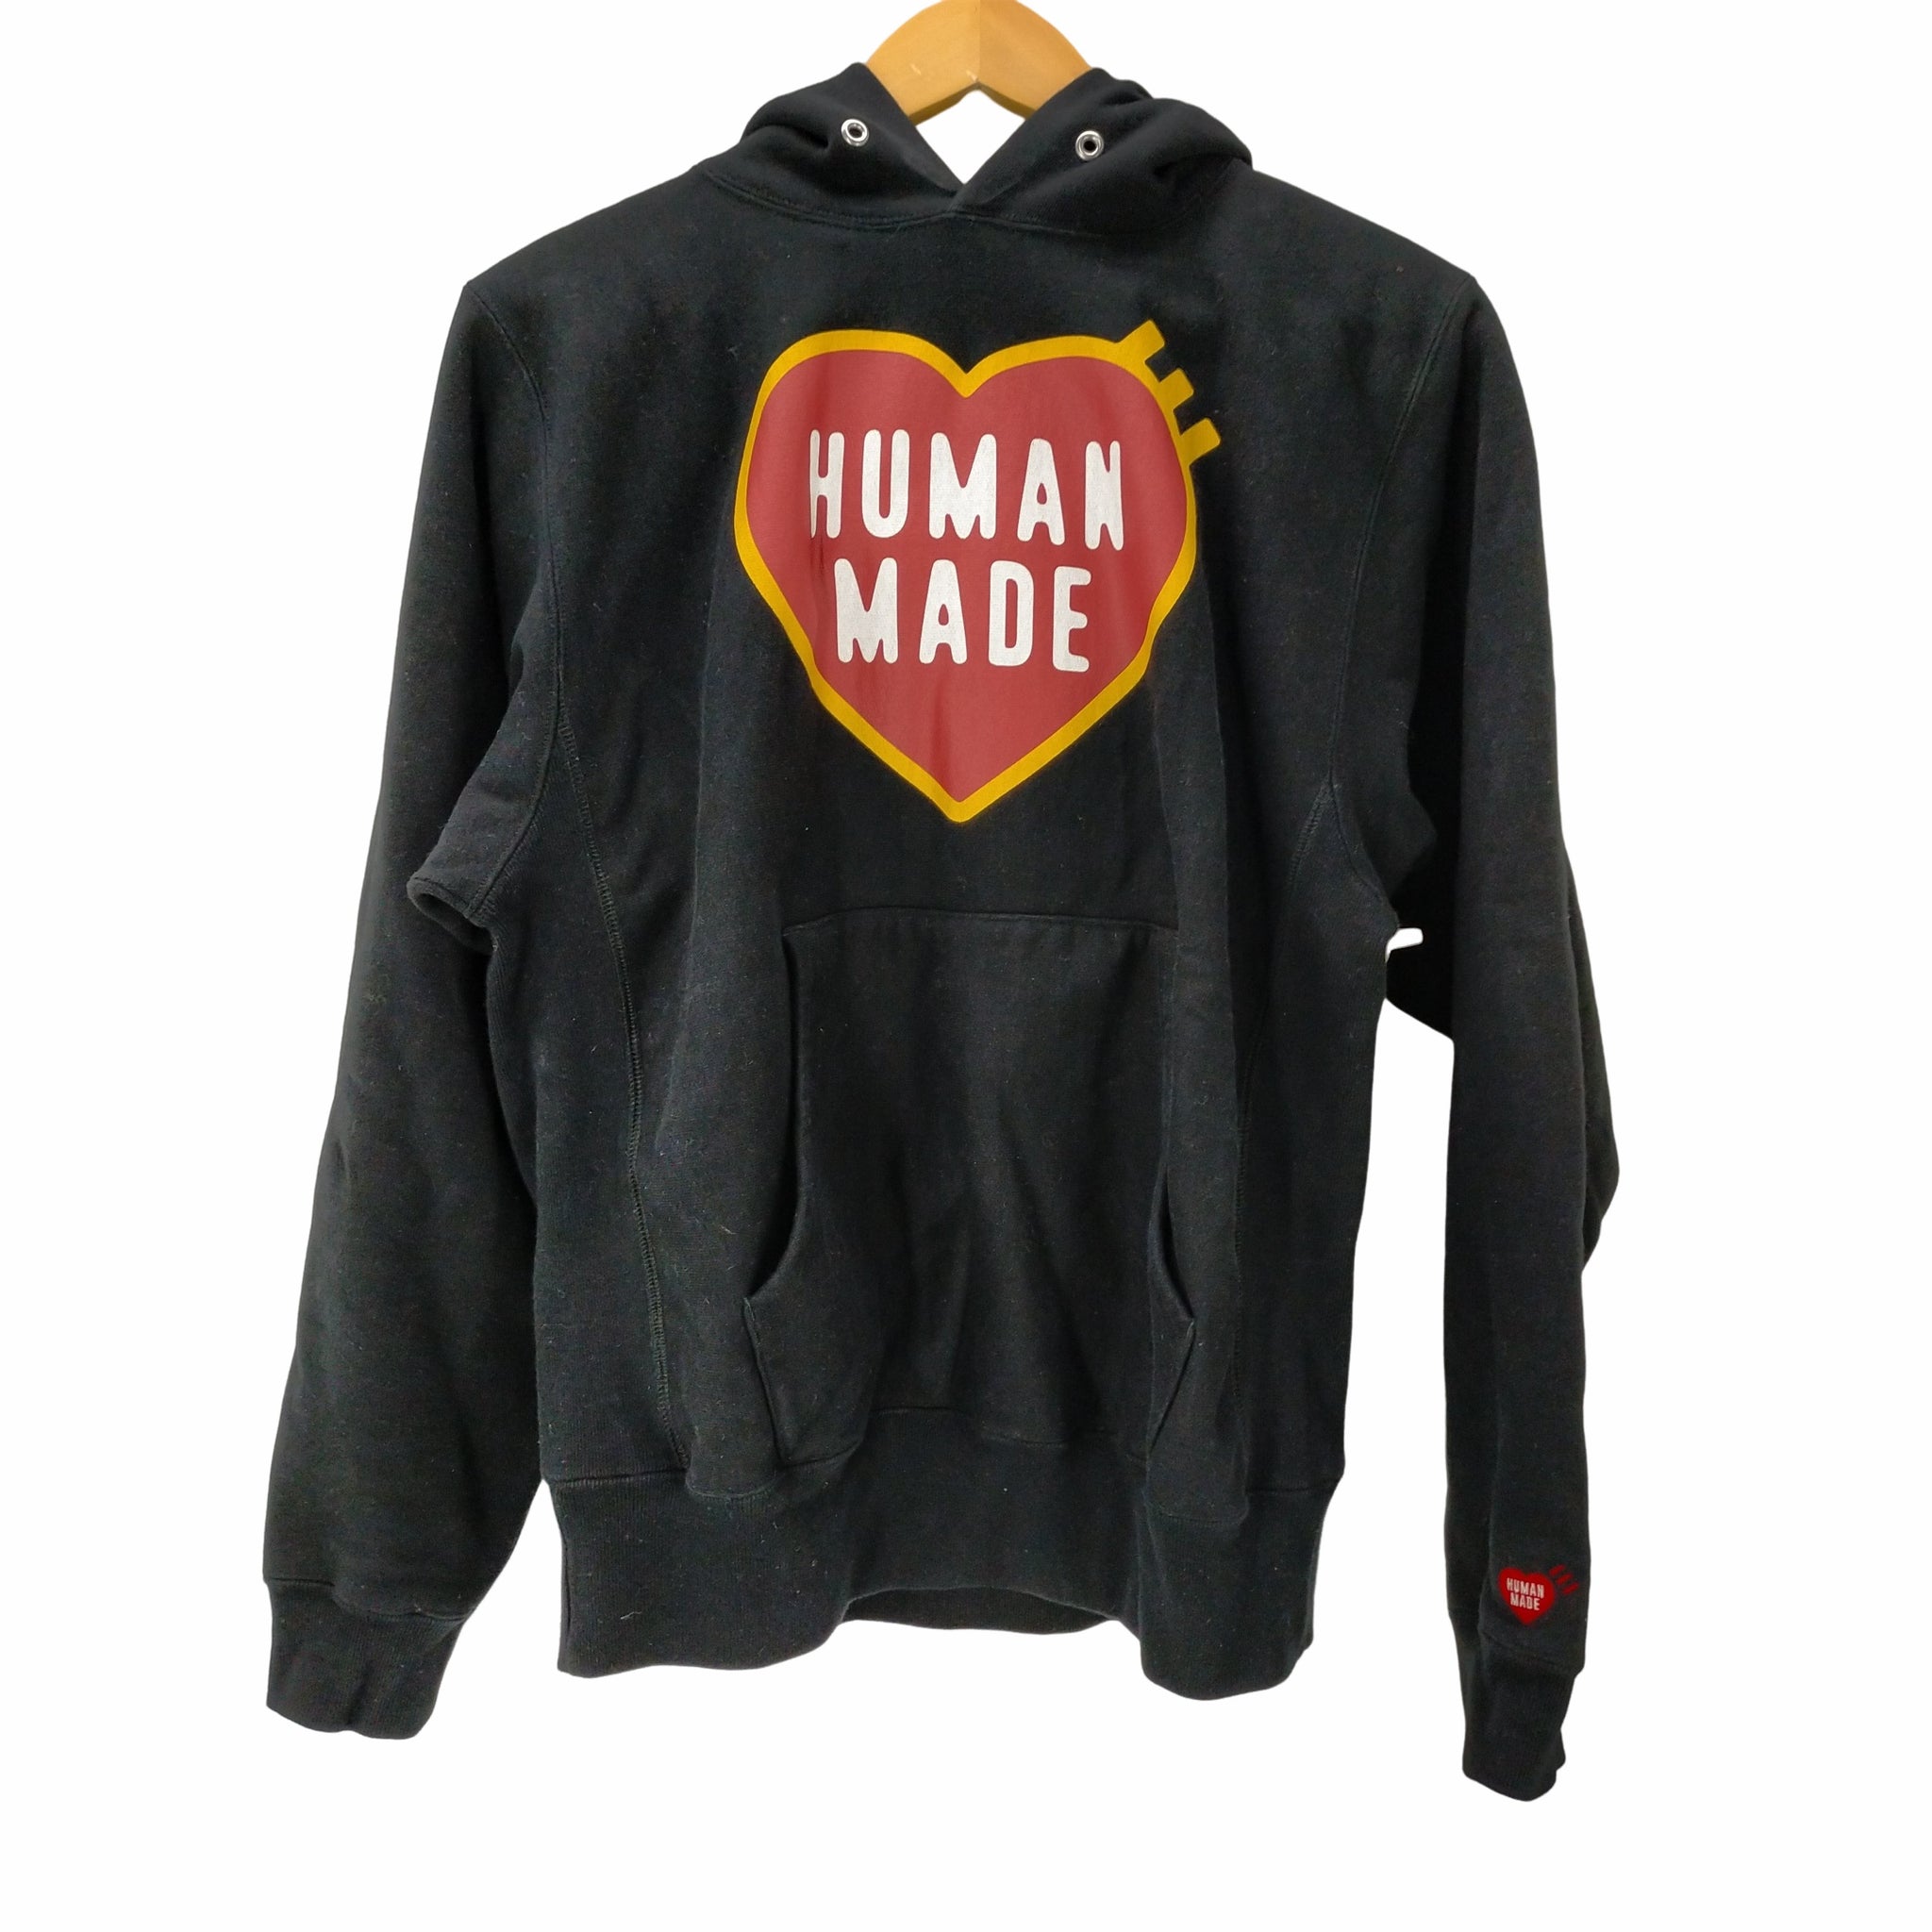 HUMAN MADE(ヒューマンメイド)23aw HEAVY WEIGHT HOODIE 袖ロゴ 刺しゅう ハートプリント パーカー